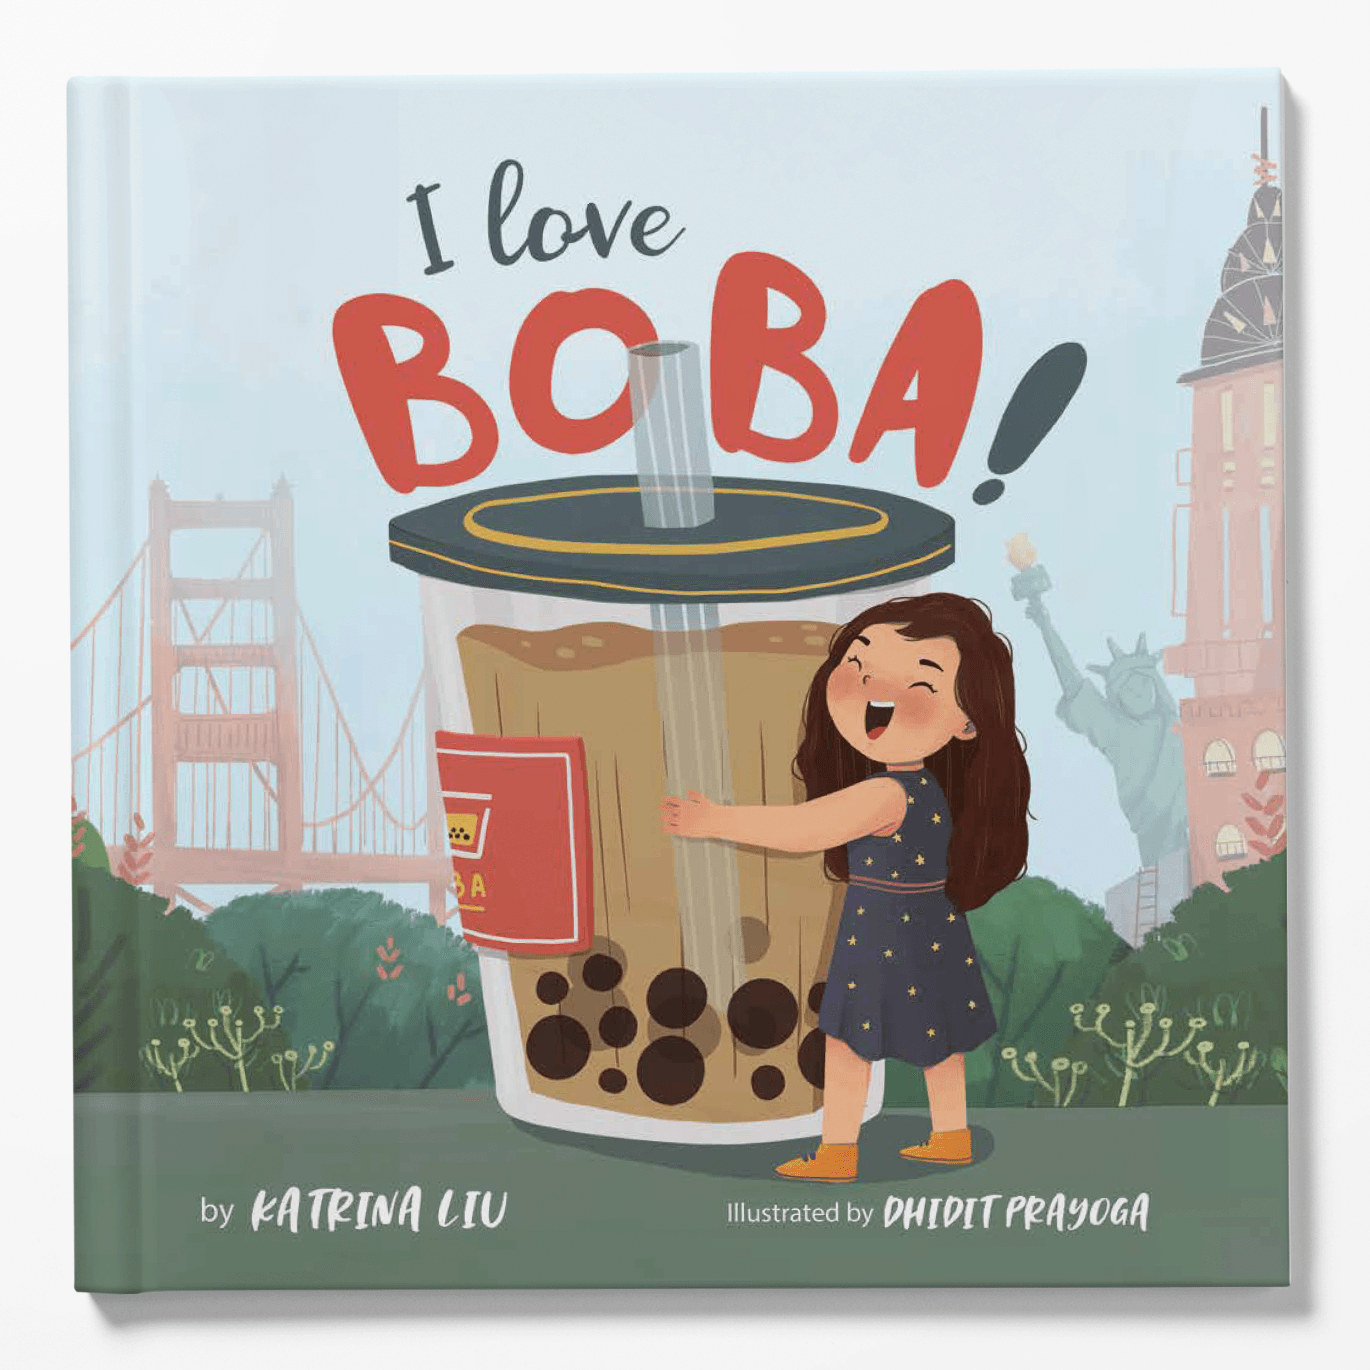 I love BOBA! - The First Children's Book about Bubble Tea